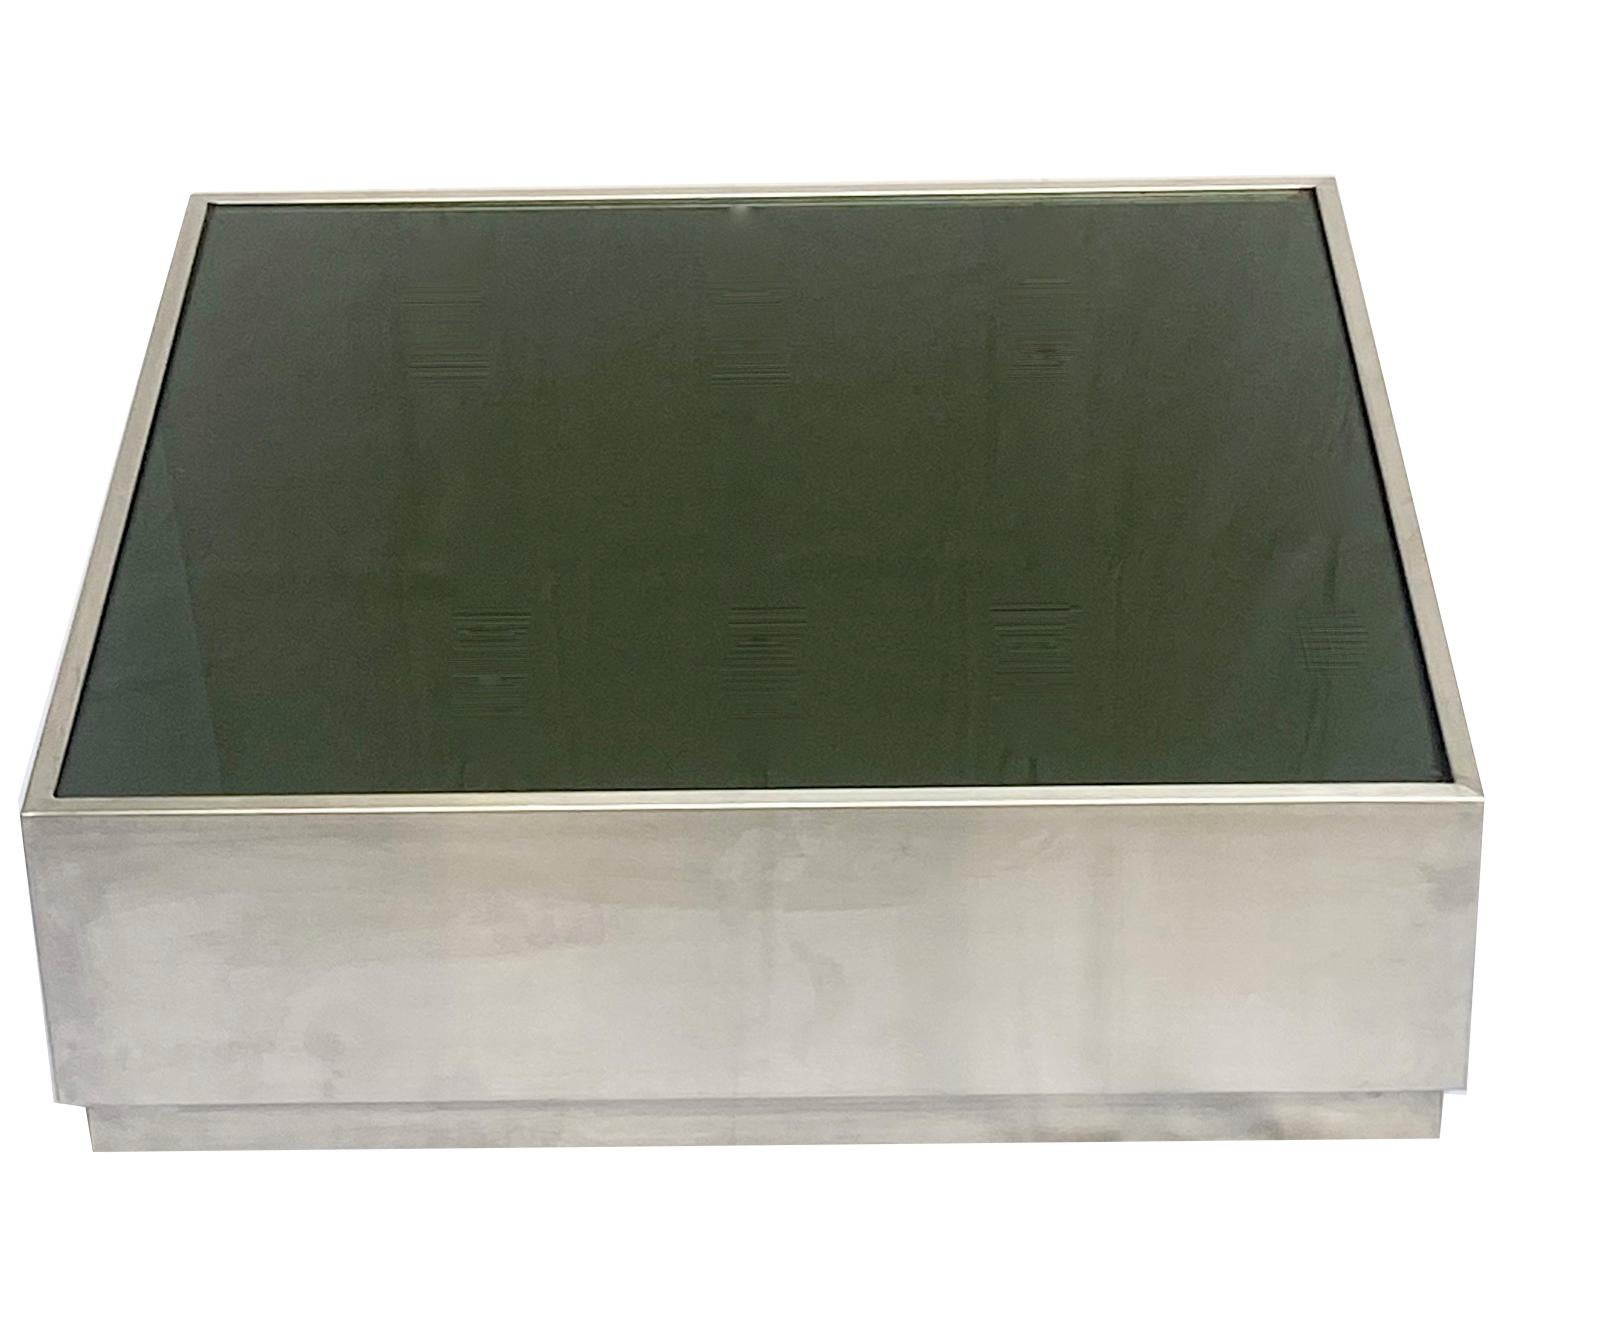 Amazing brushed stainless steel coffee table with smoked green glass top. This wonderful piece was designed in the 1970s.